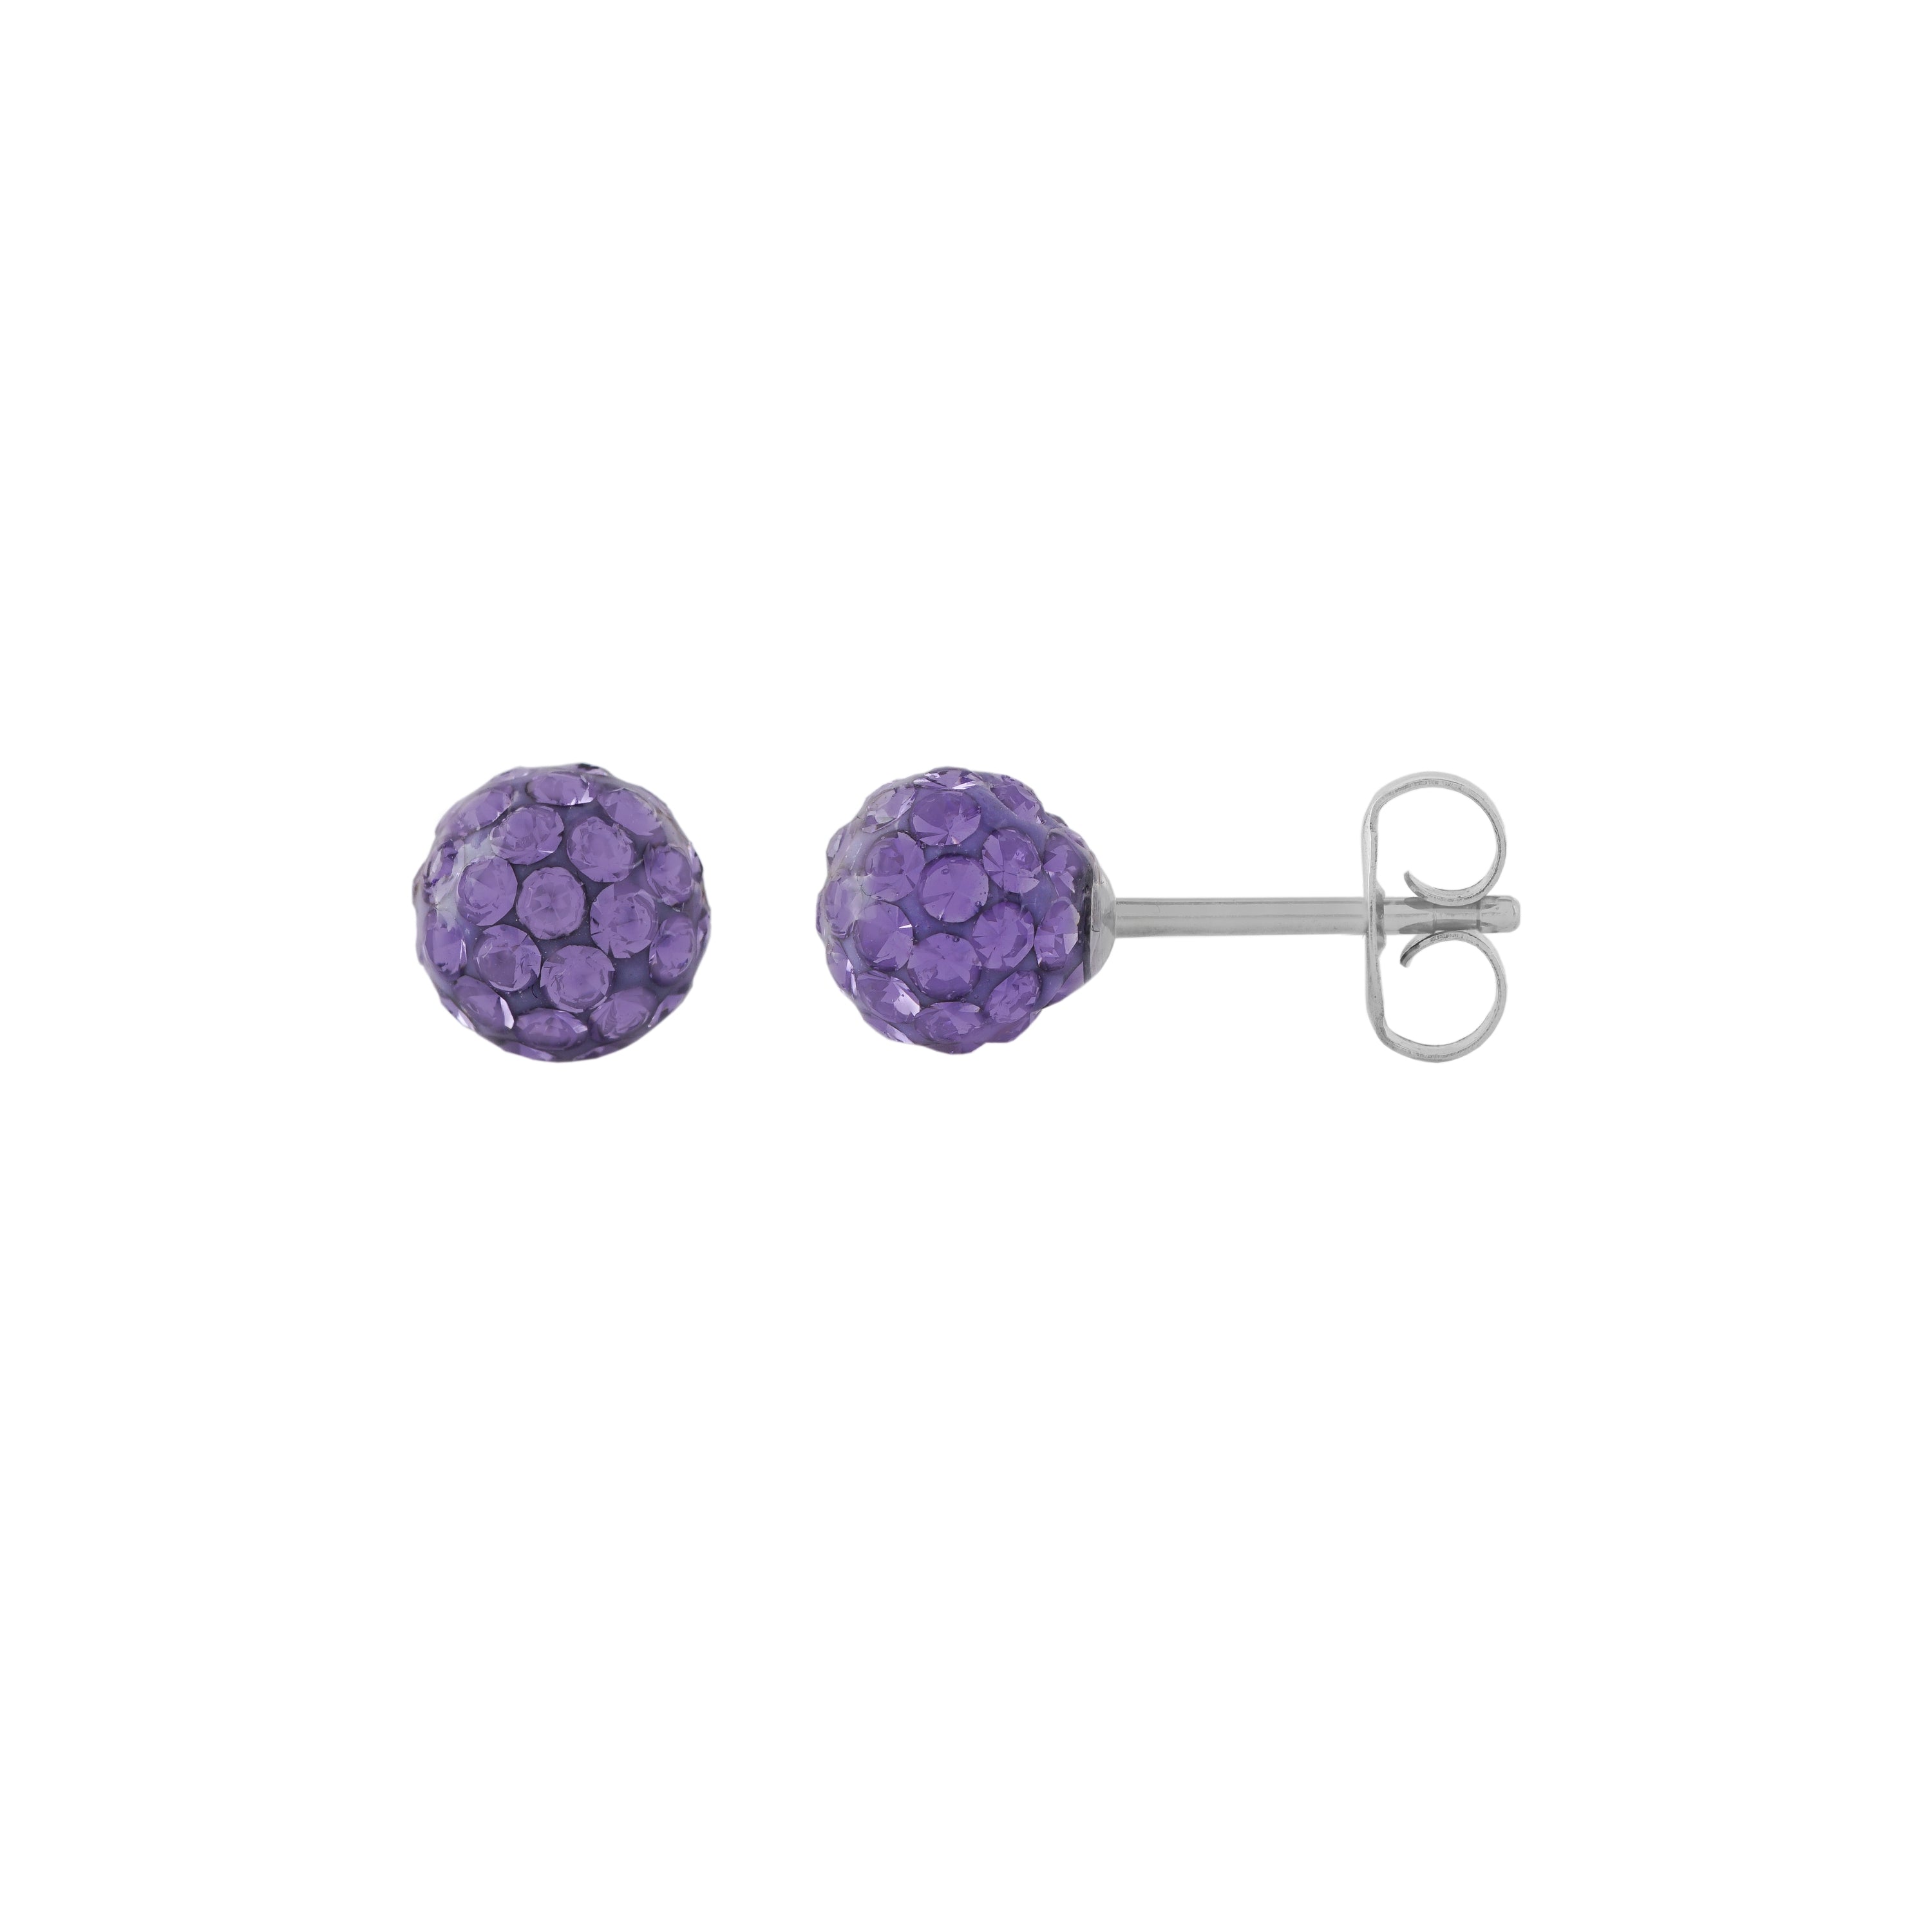 6MM Fireball Ð Tanzanite Allergy free Stainless Steel Ear Studs | MADE IN USA | Ideal for everyday wear